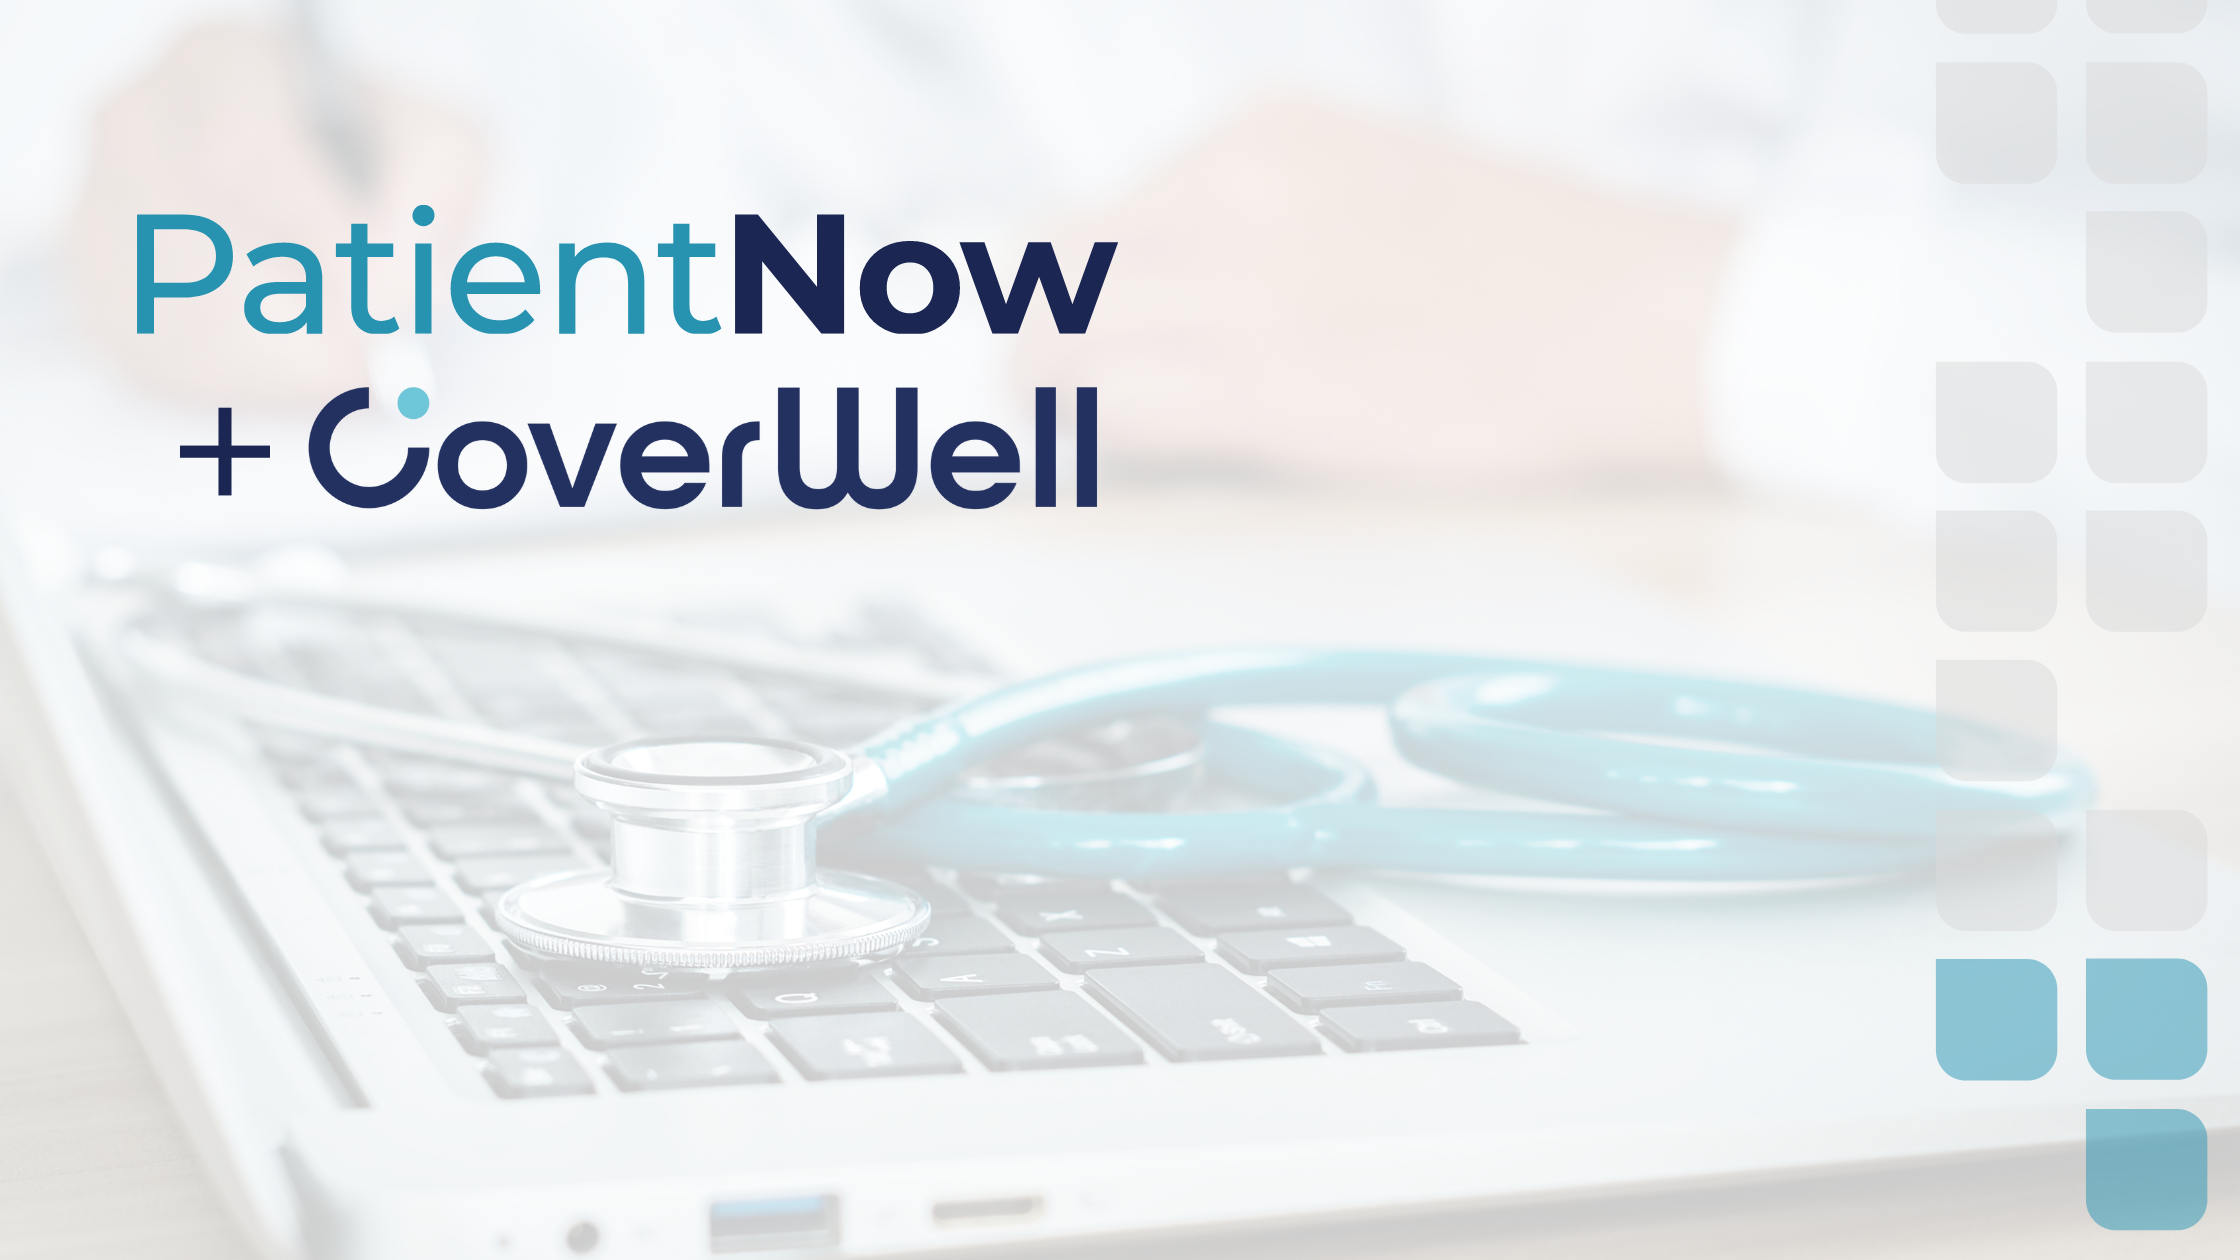 A laptop with a stethoscope on top of its keyboard and the logos for PatientNow and CoverWell